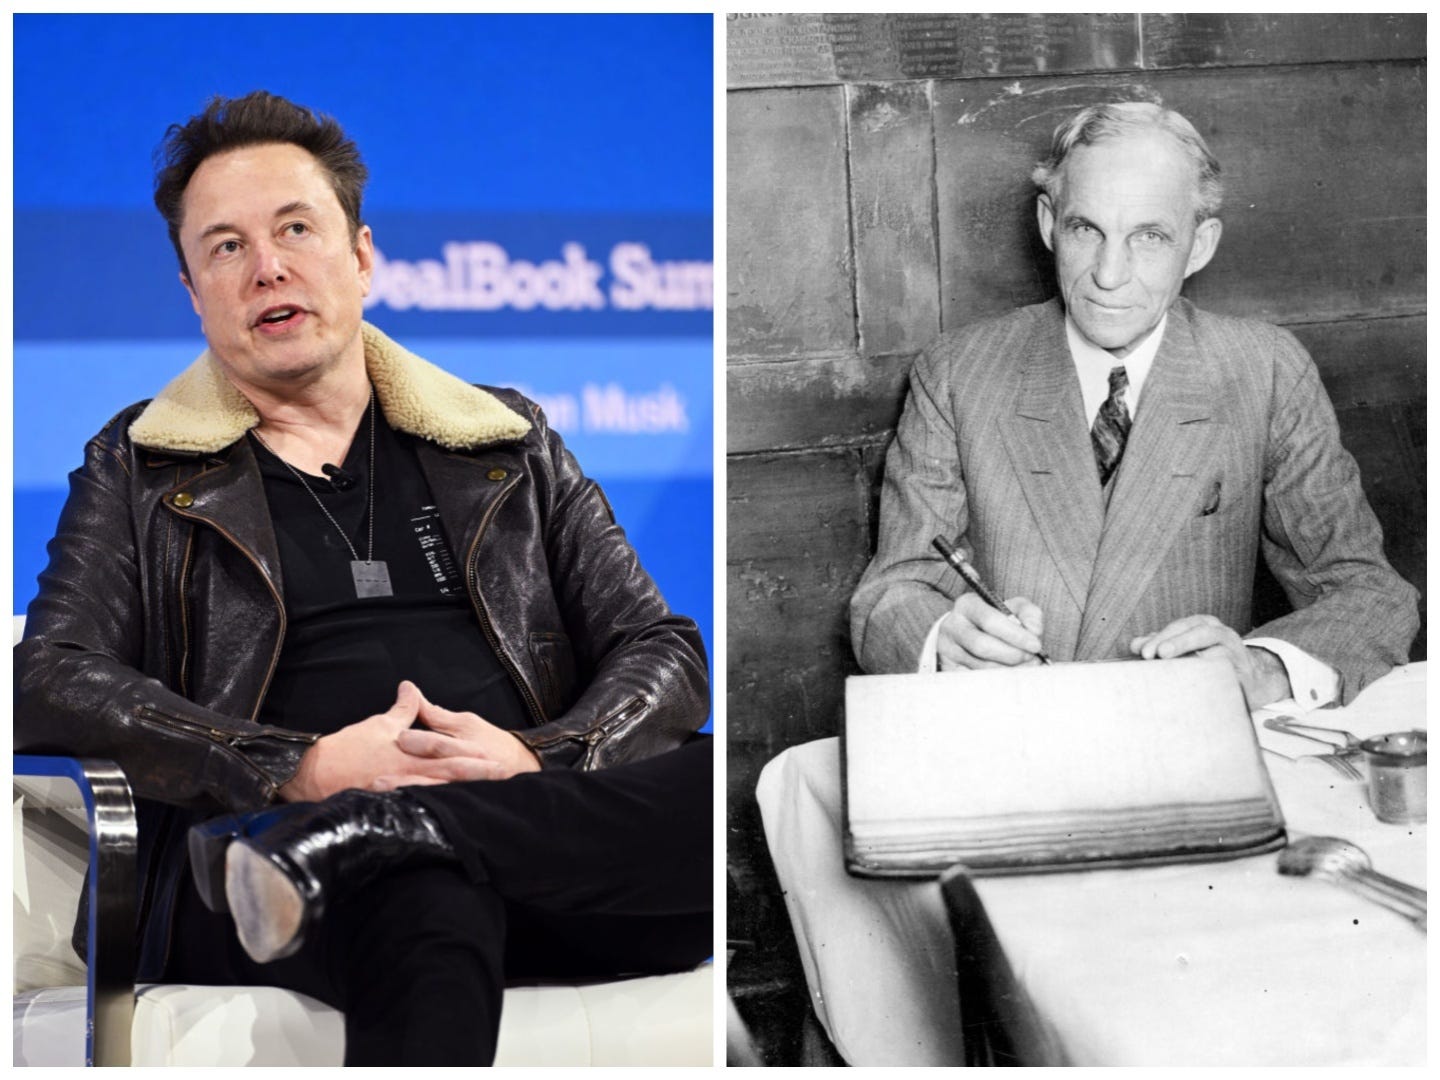 Tesla CEO Elon Musk and Ford founder Henry Ford